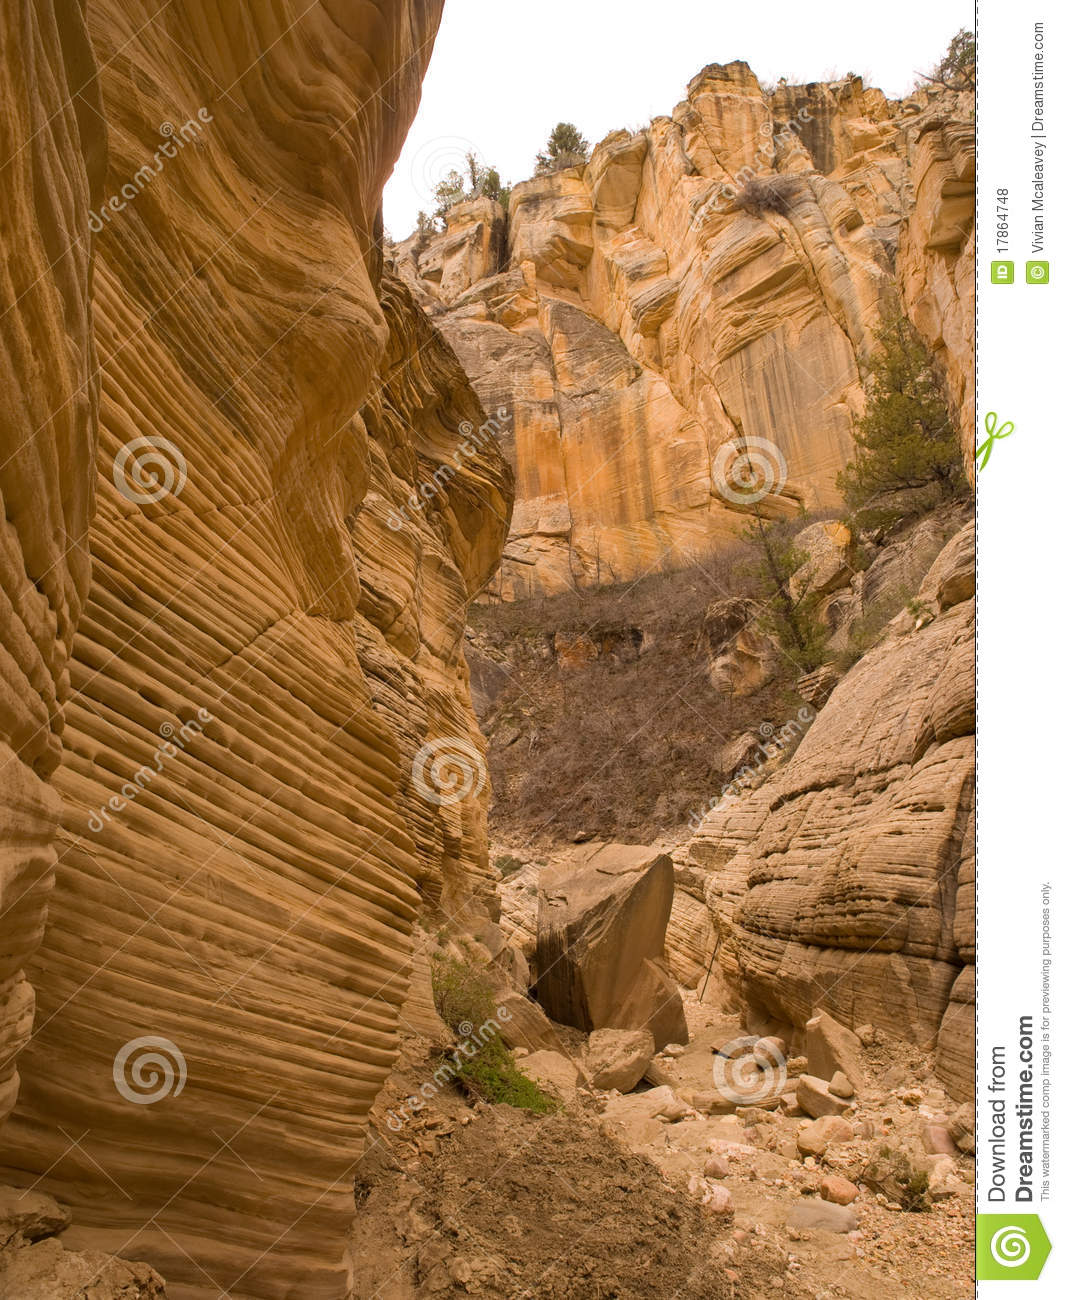 Royalty Free Stock Photos  Desert Canyon With Eroded Cliffs  Image